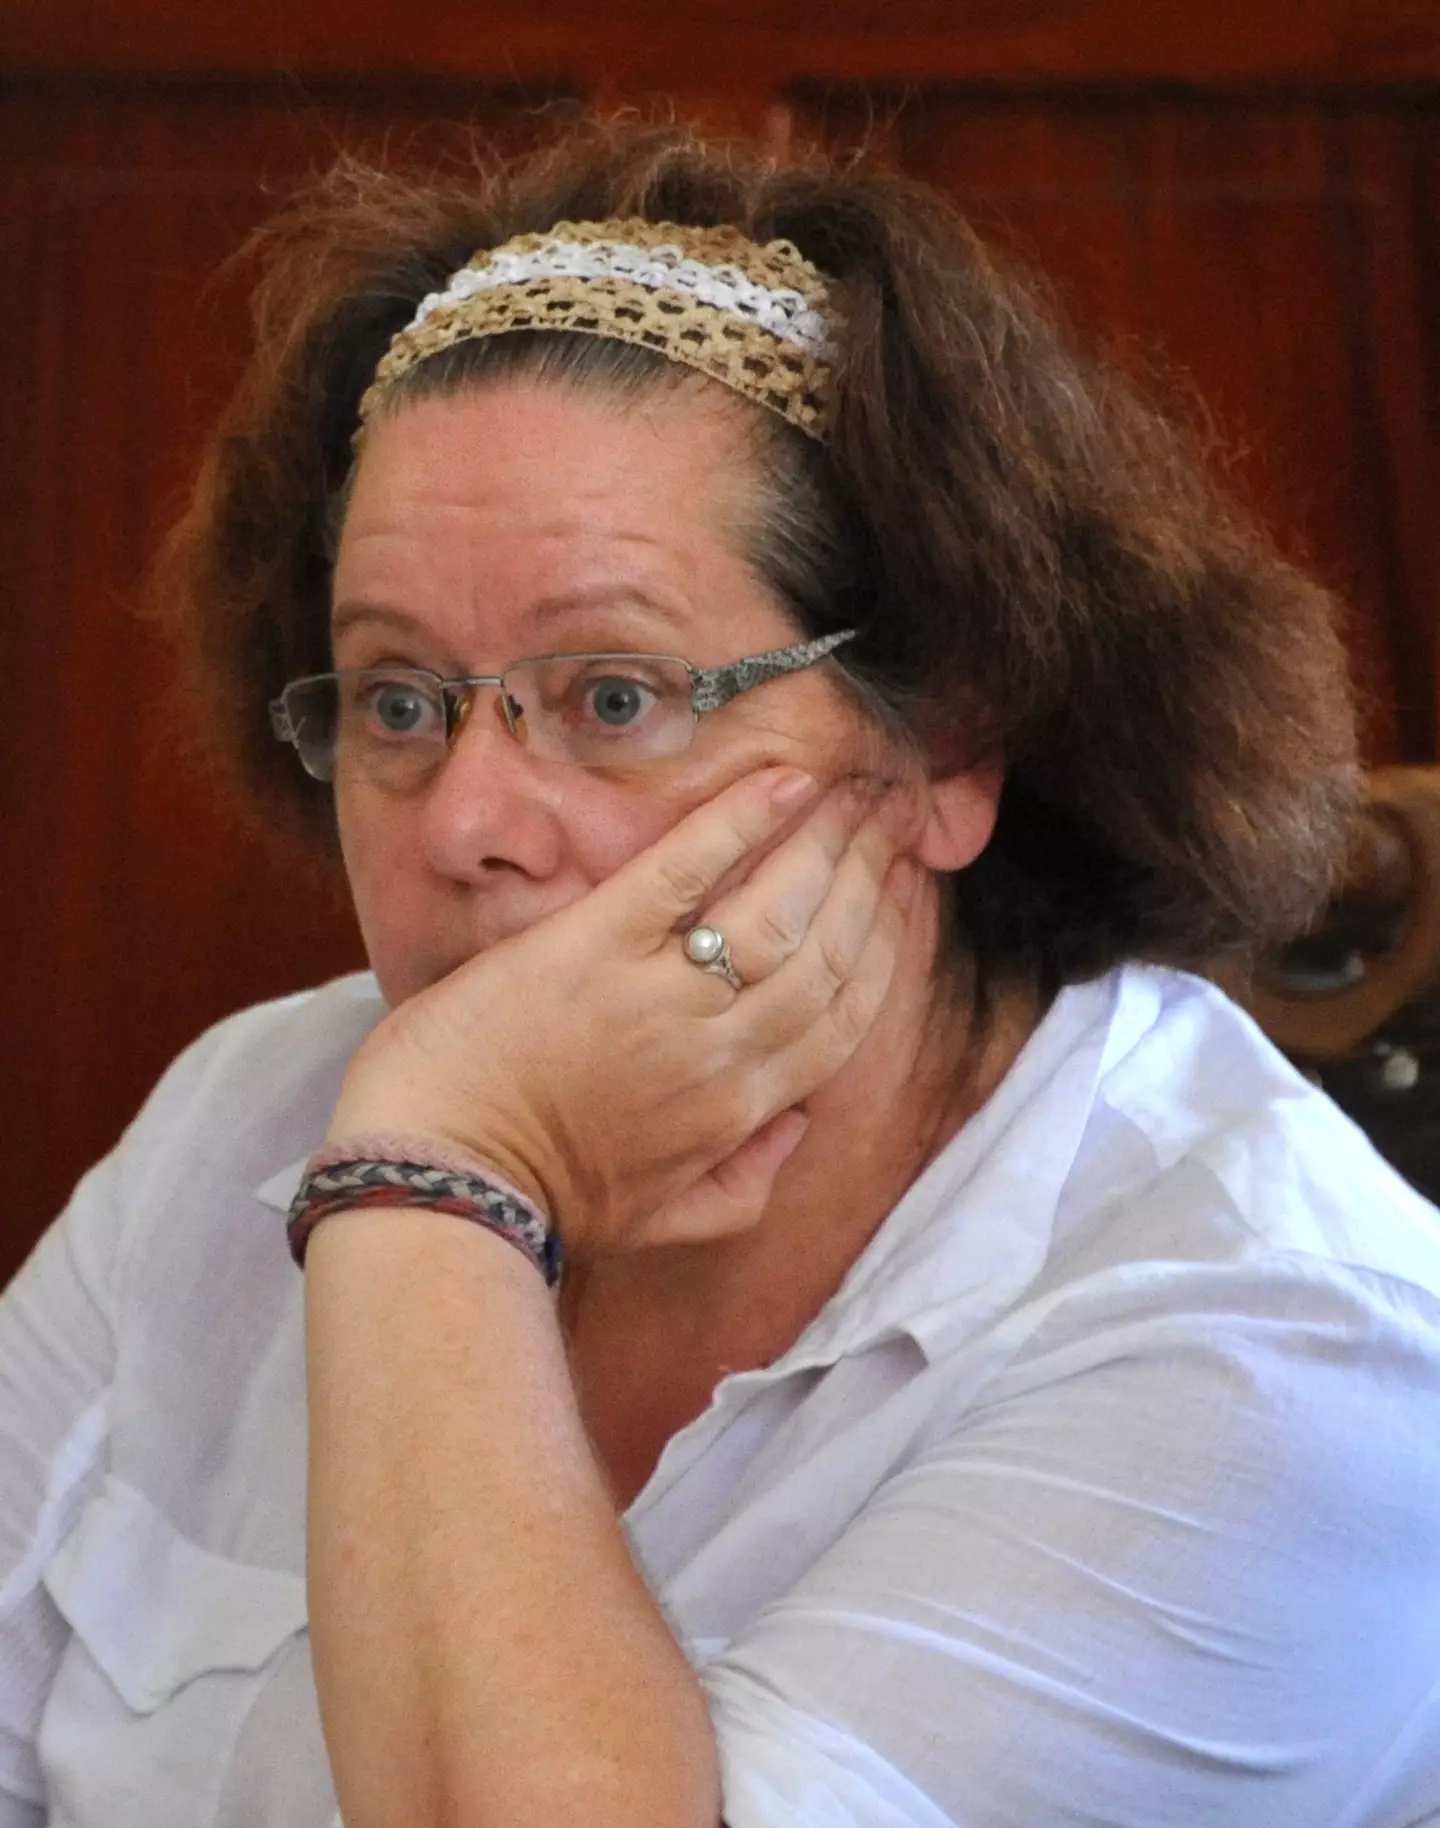 Lindsay Sandiford is awaiting her death on death row after she was caught smuggling cocaine into Indonesia.